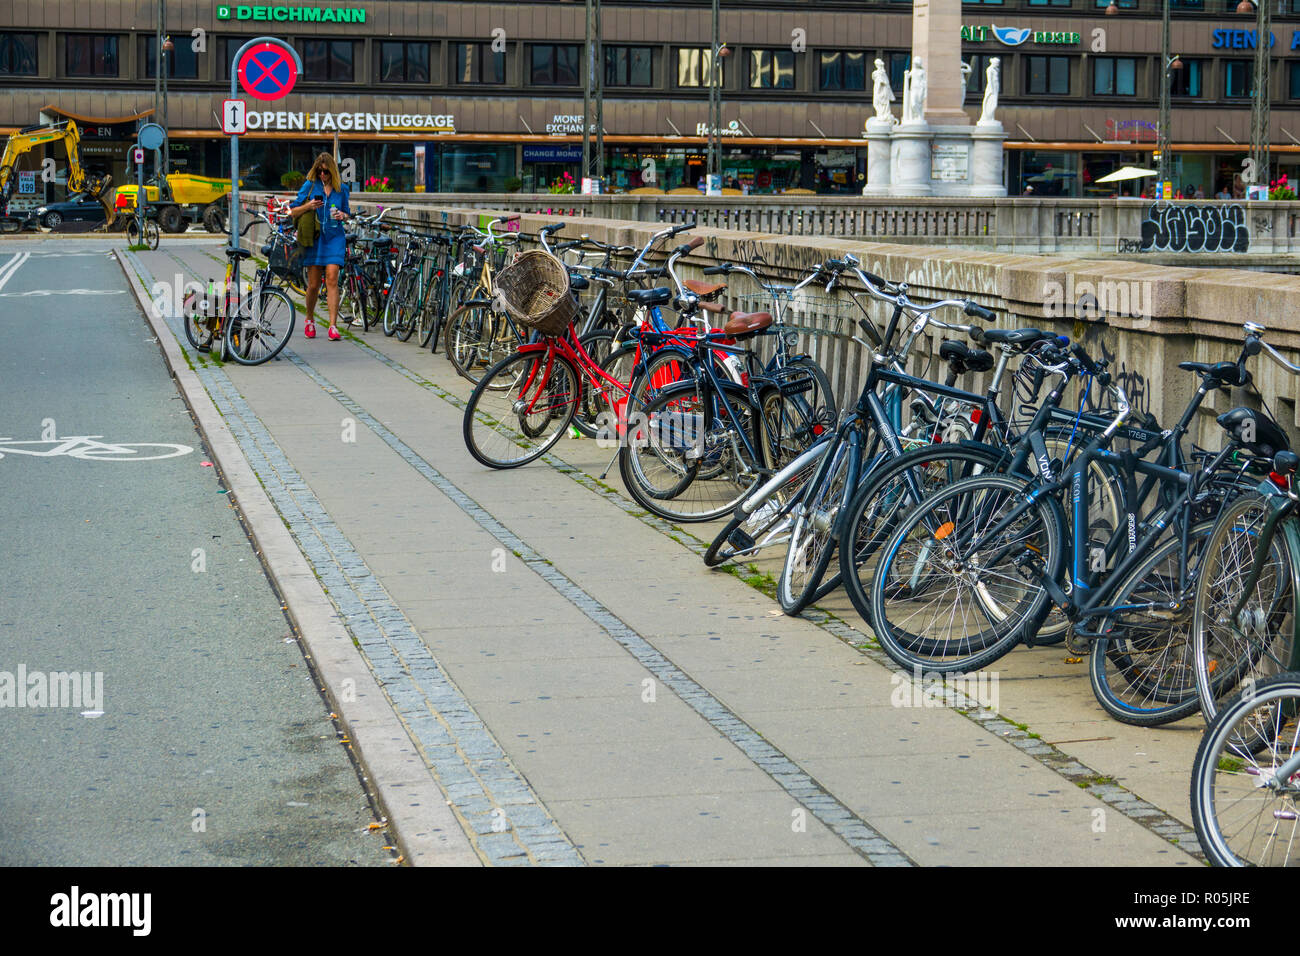 Bicycle Park Copenhagen High Resolution Stock Photography and Images - Alamy